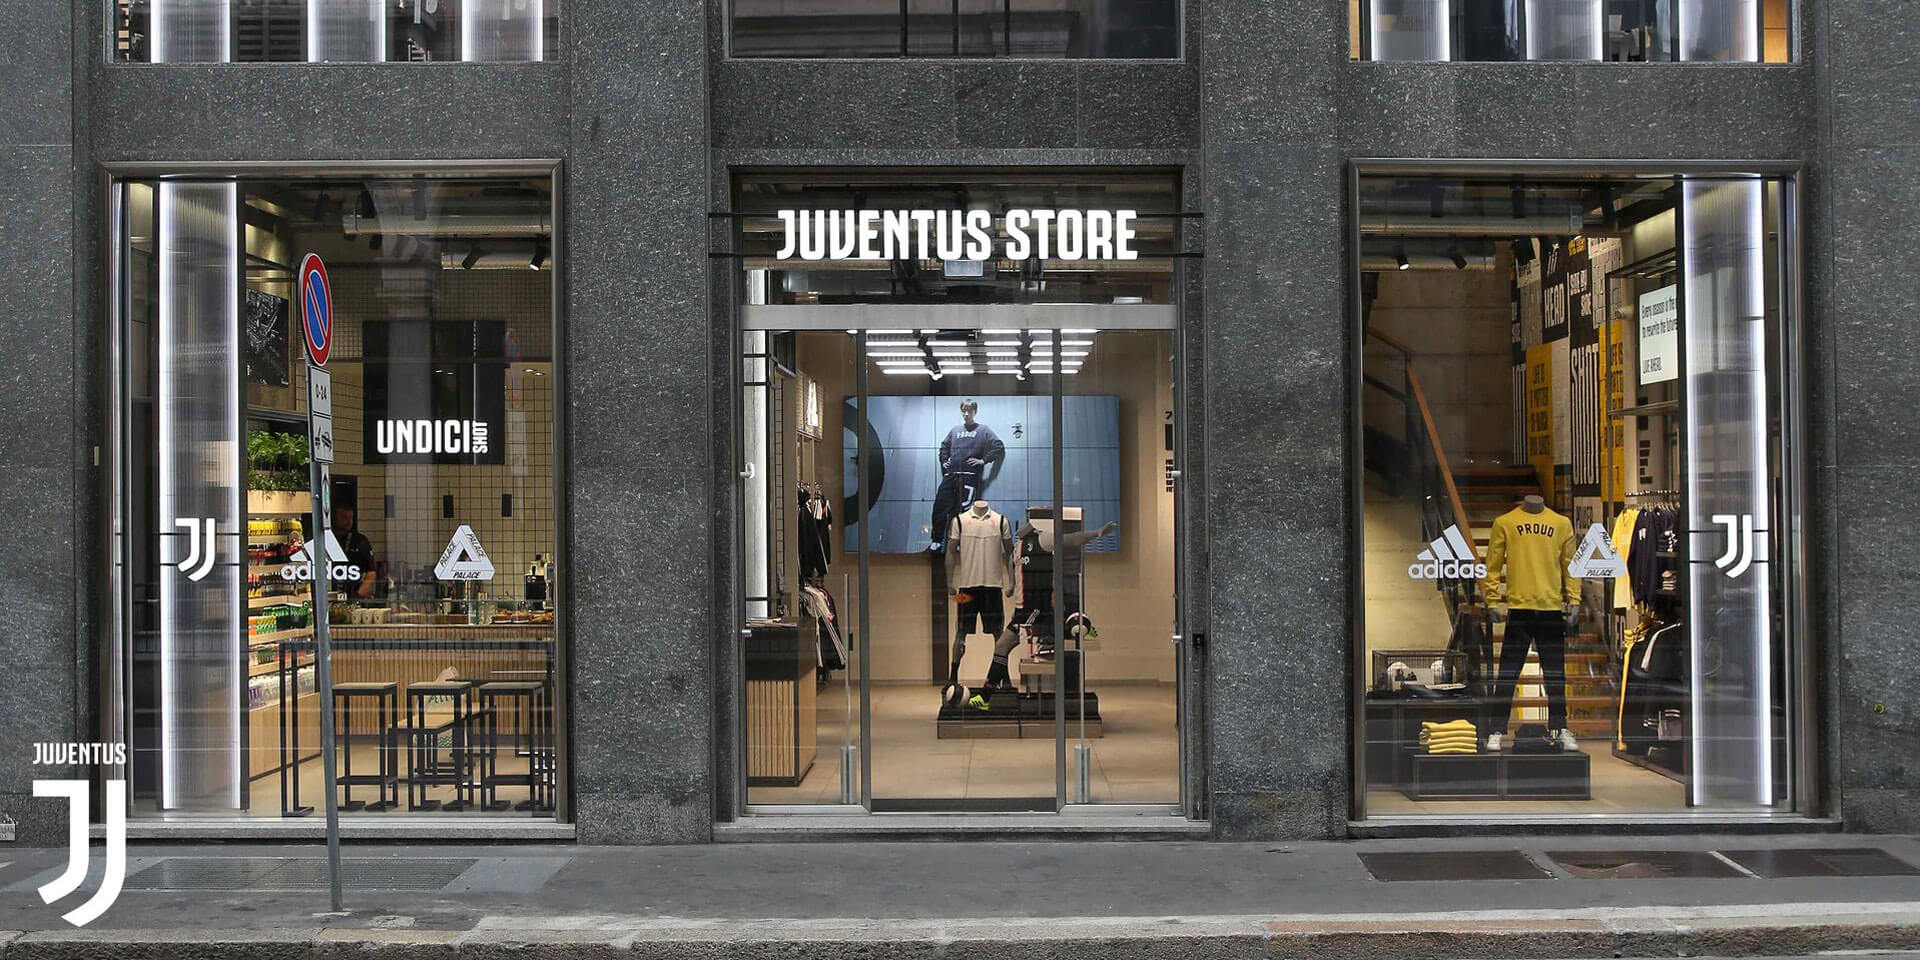 Juventus launches Official Store on Tmall - Juventus